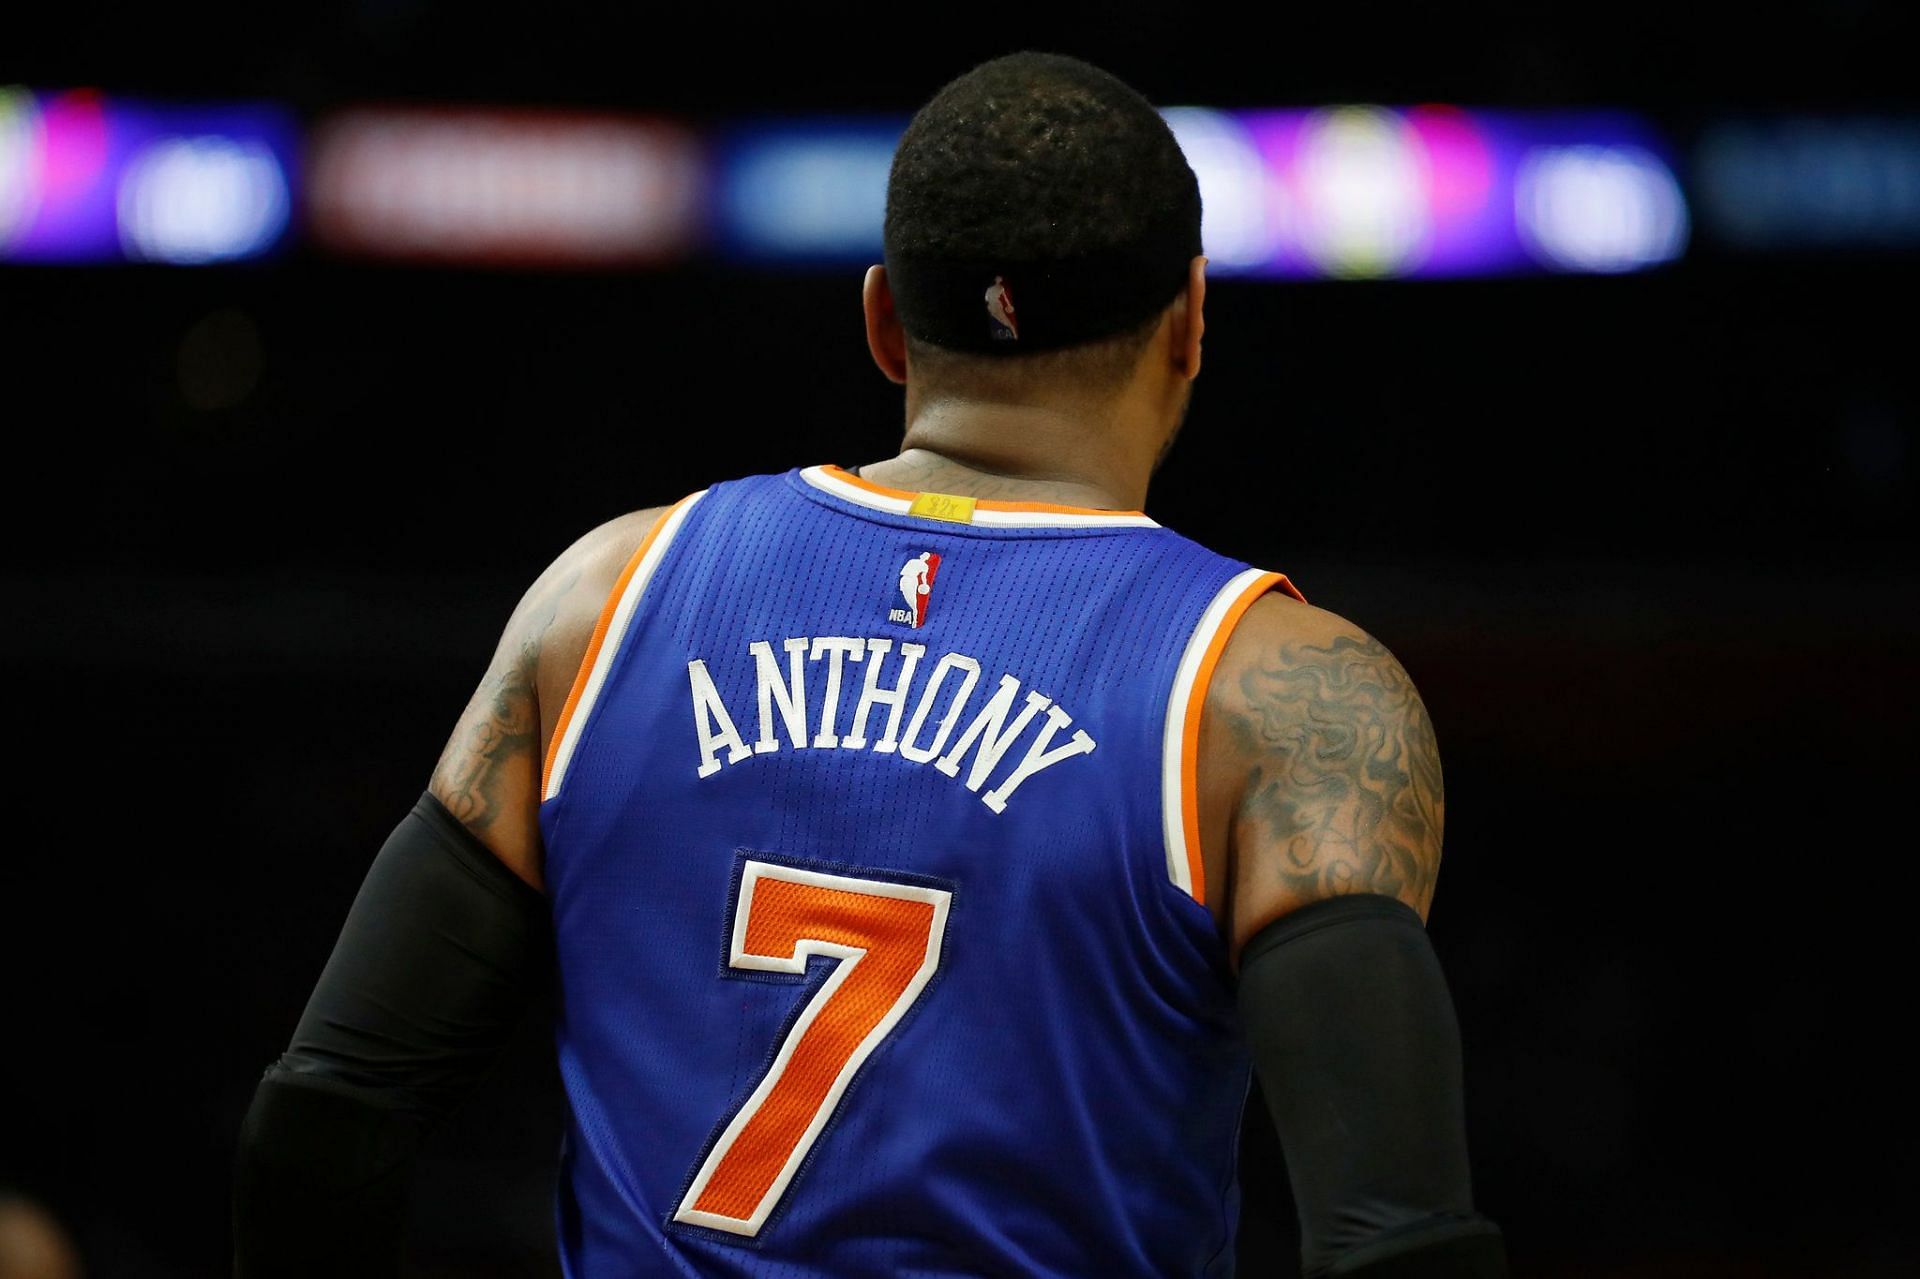 A knee injury would result in Carmelo Anthony missing the rest of the season